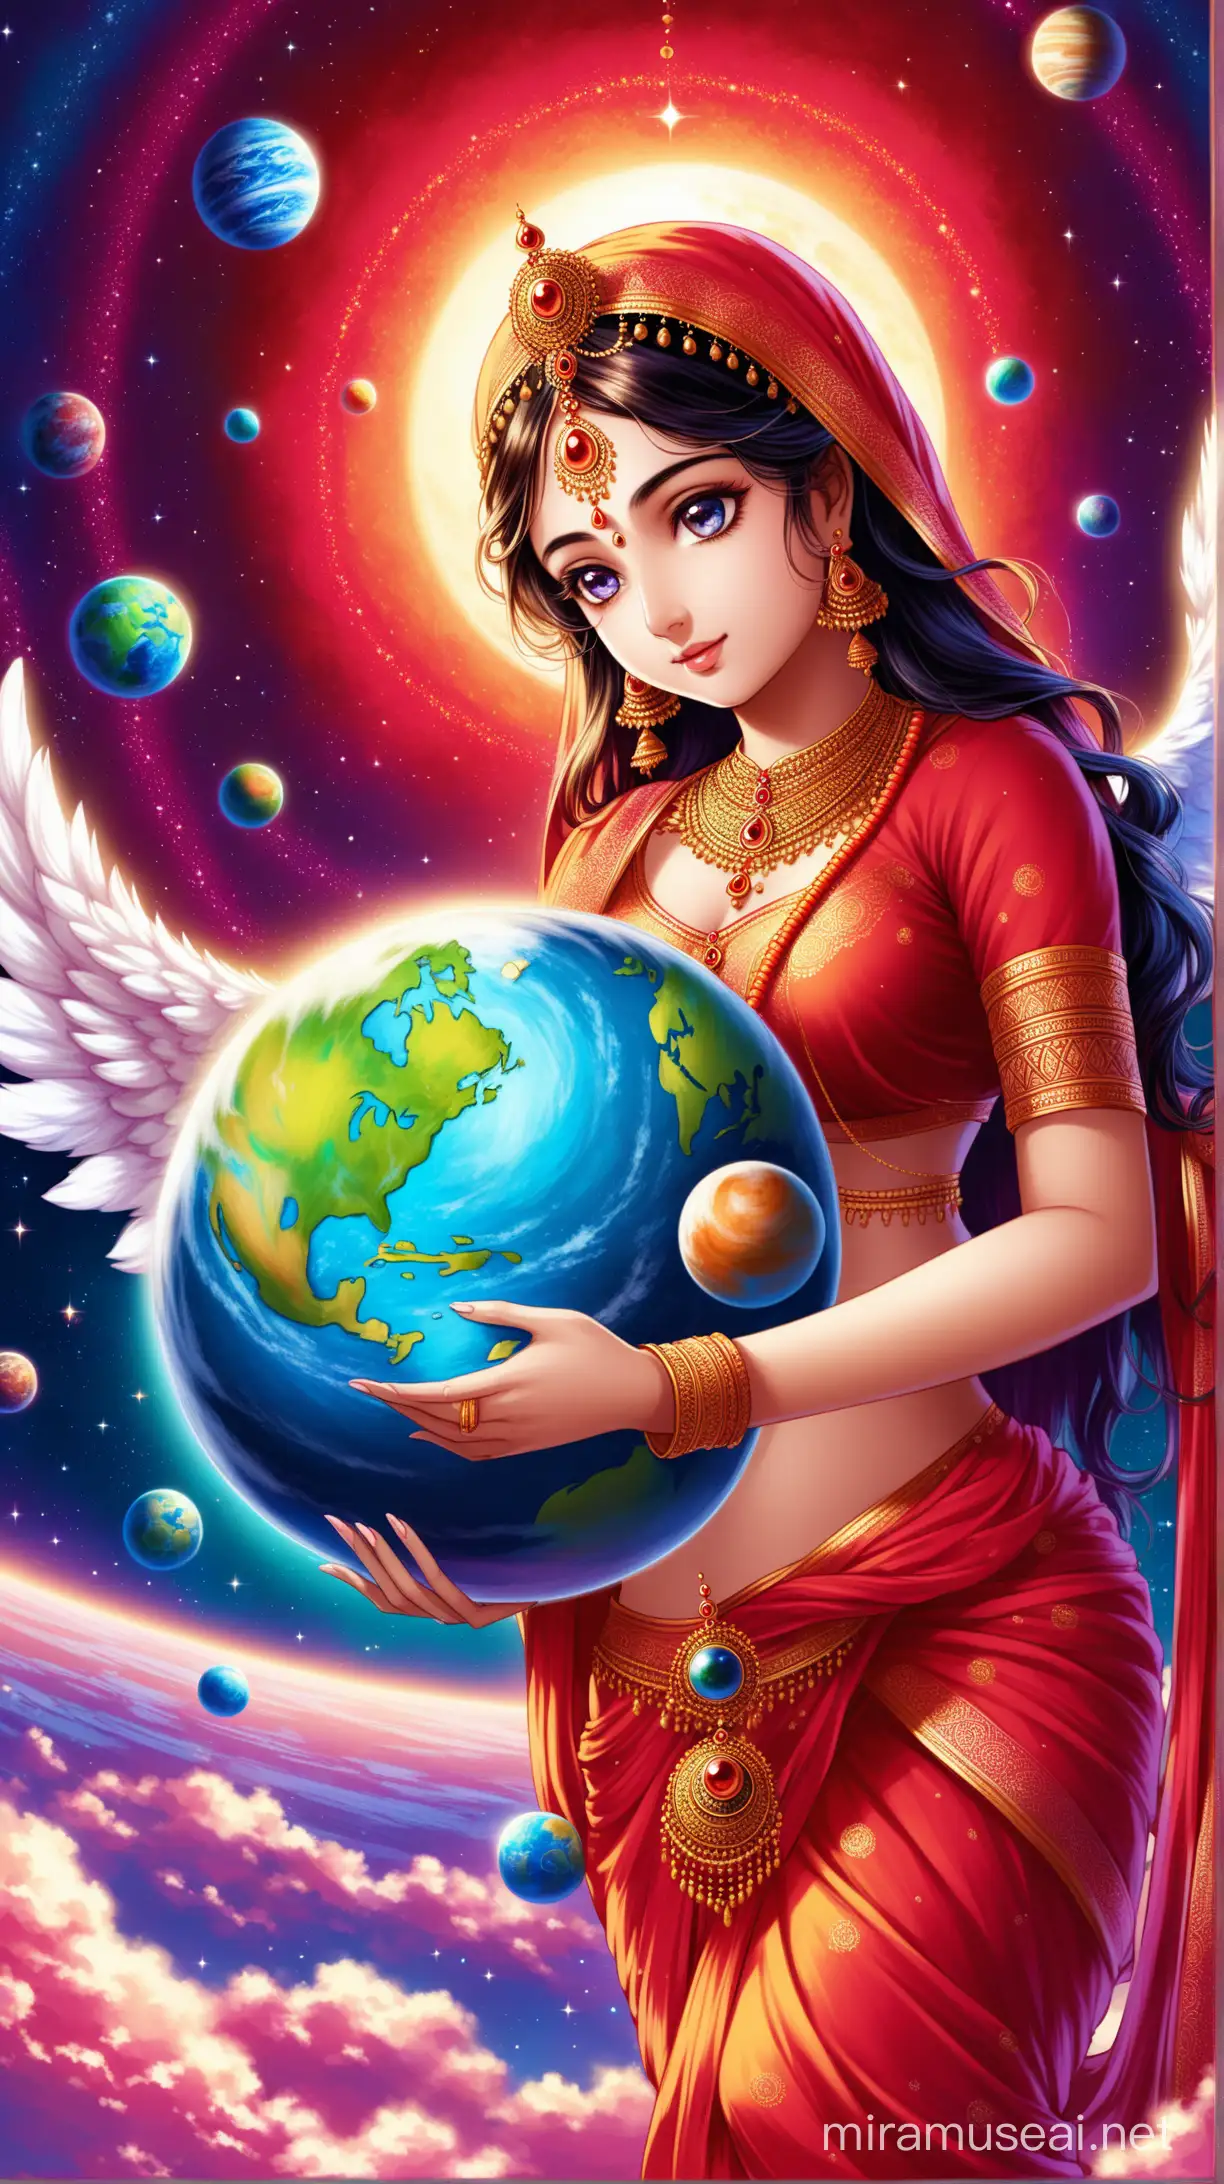 Radha playing planet, angel beautiful eyes red colour